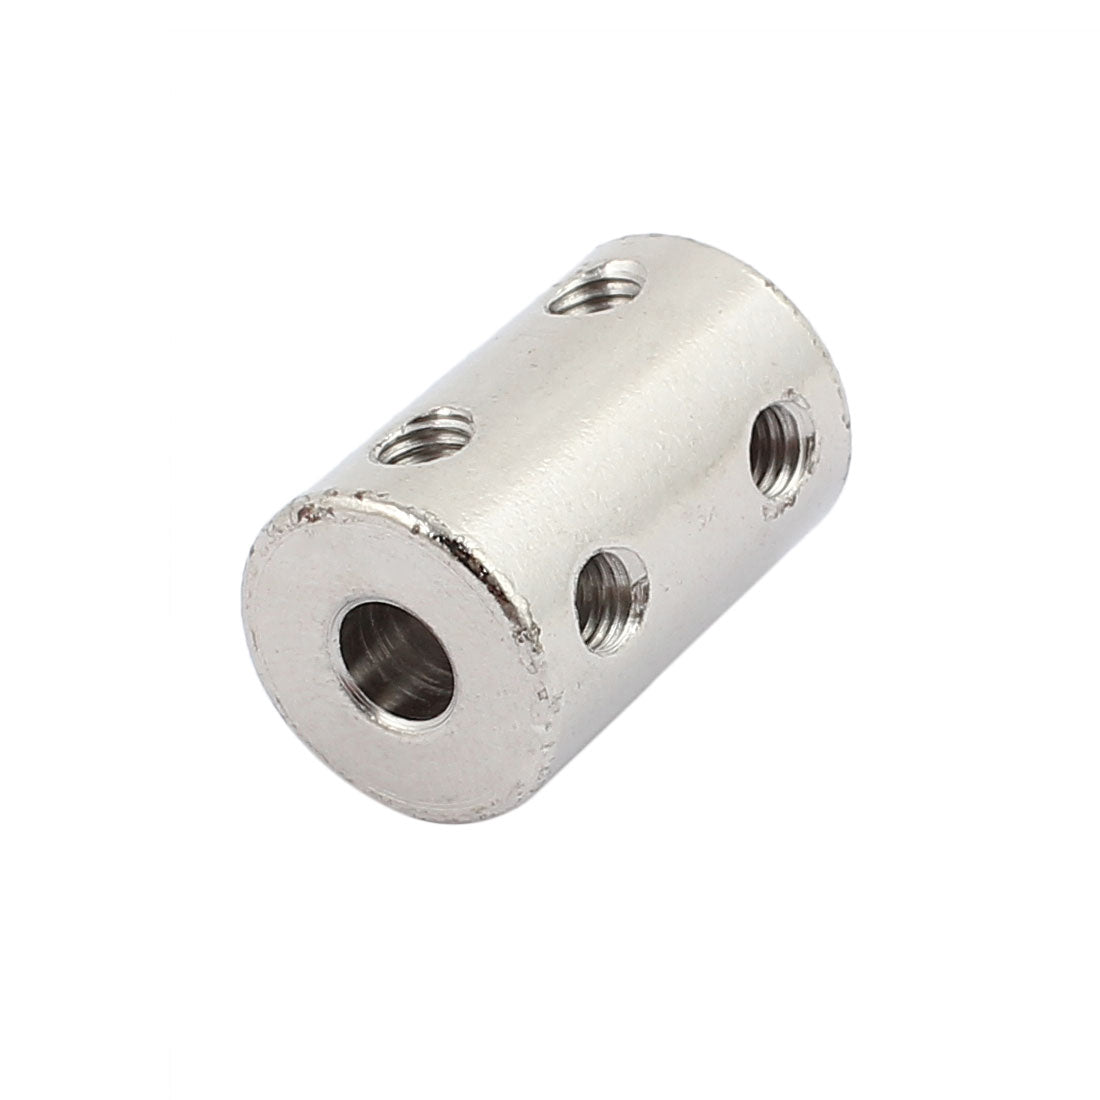 uxcell Uxcell Bore Stainless Steel Robot Motor Wheel Coupling Coupler Silver Tone